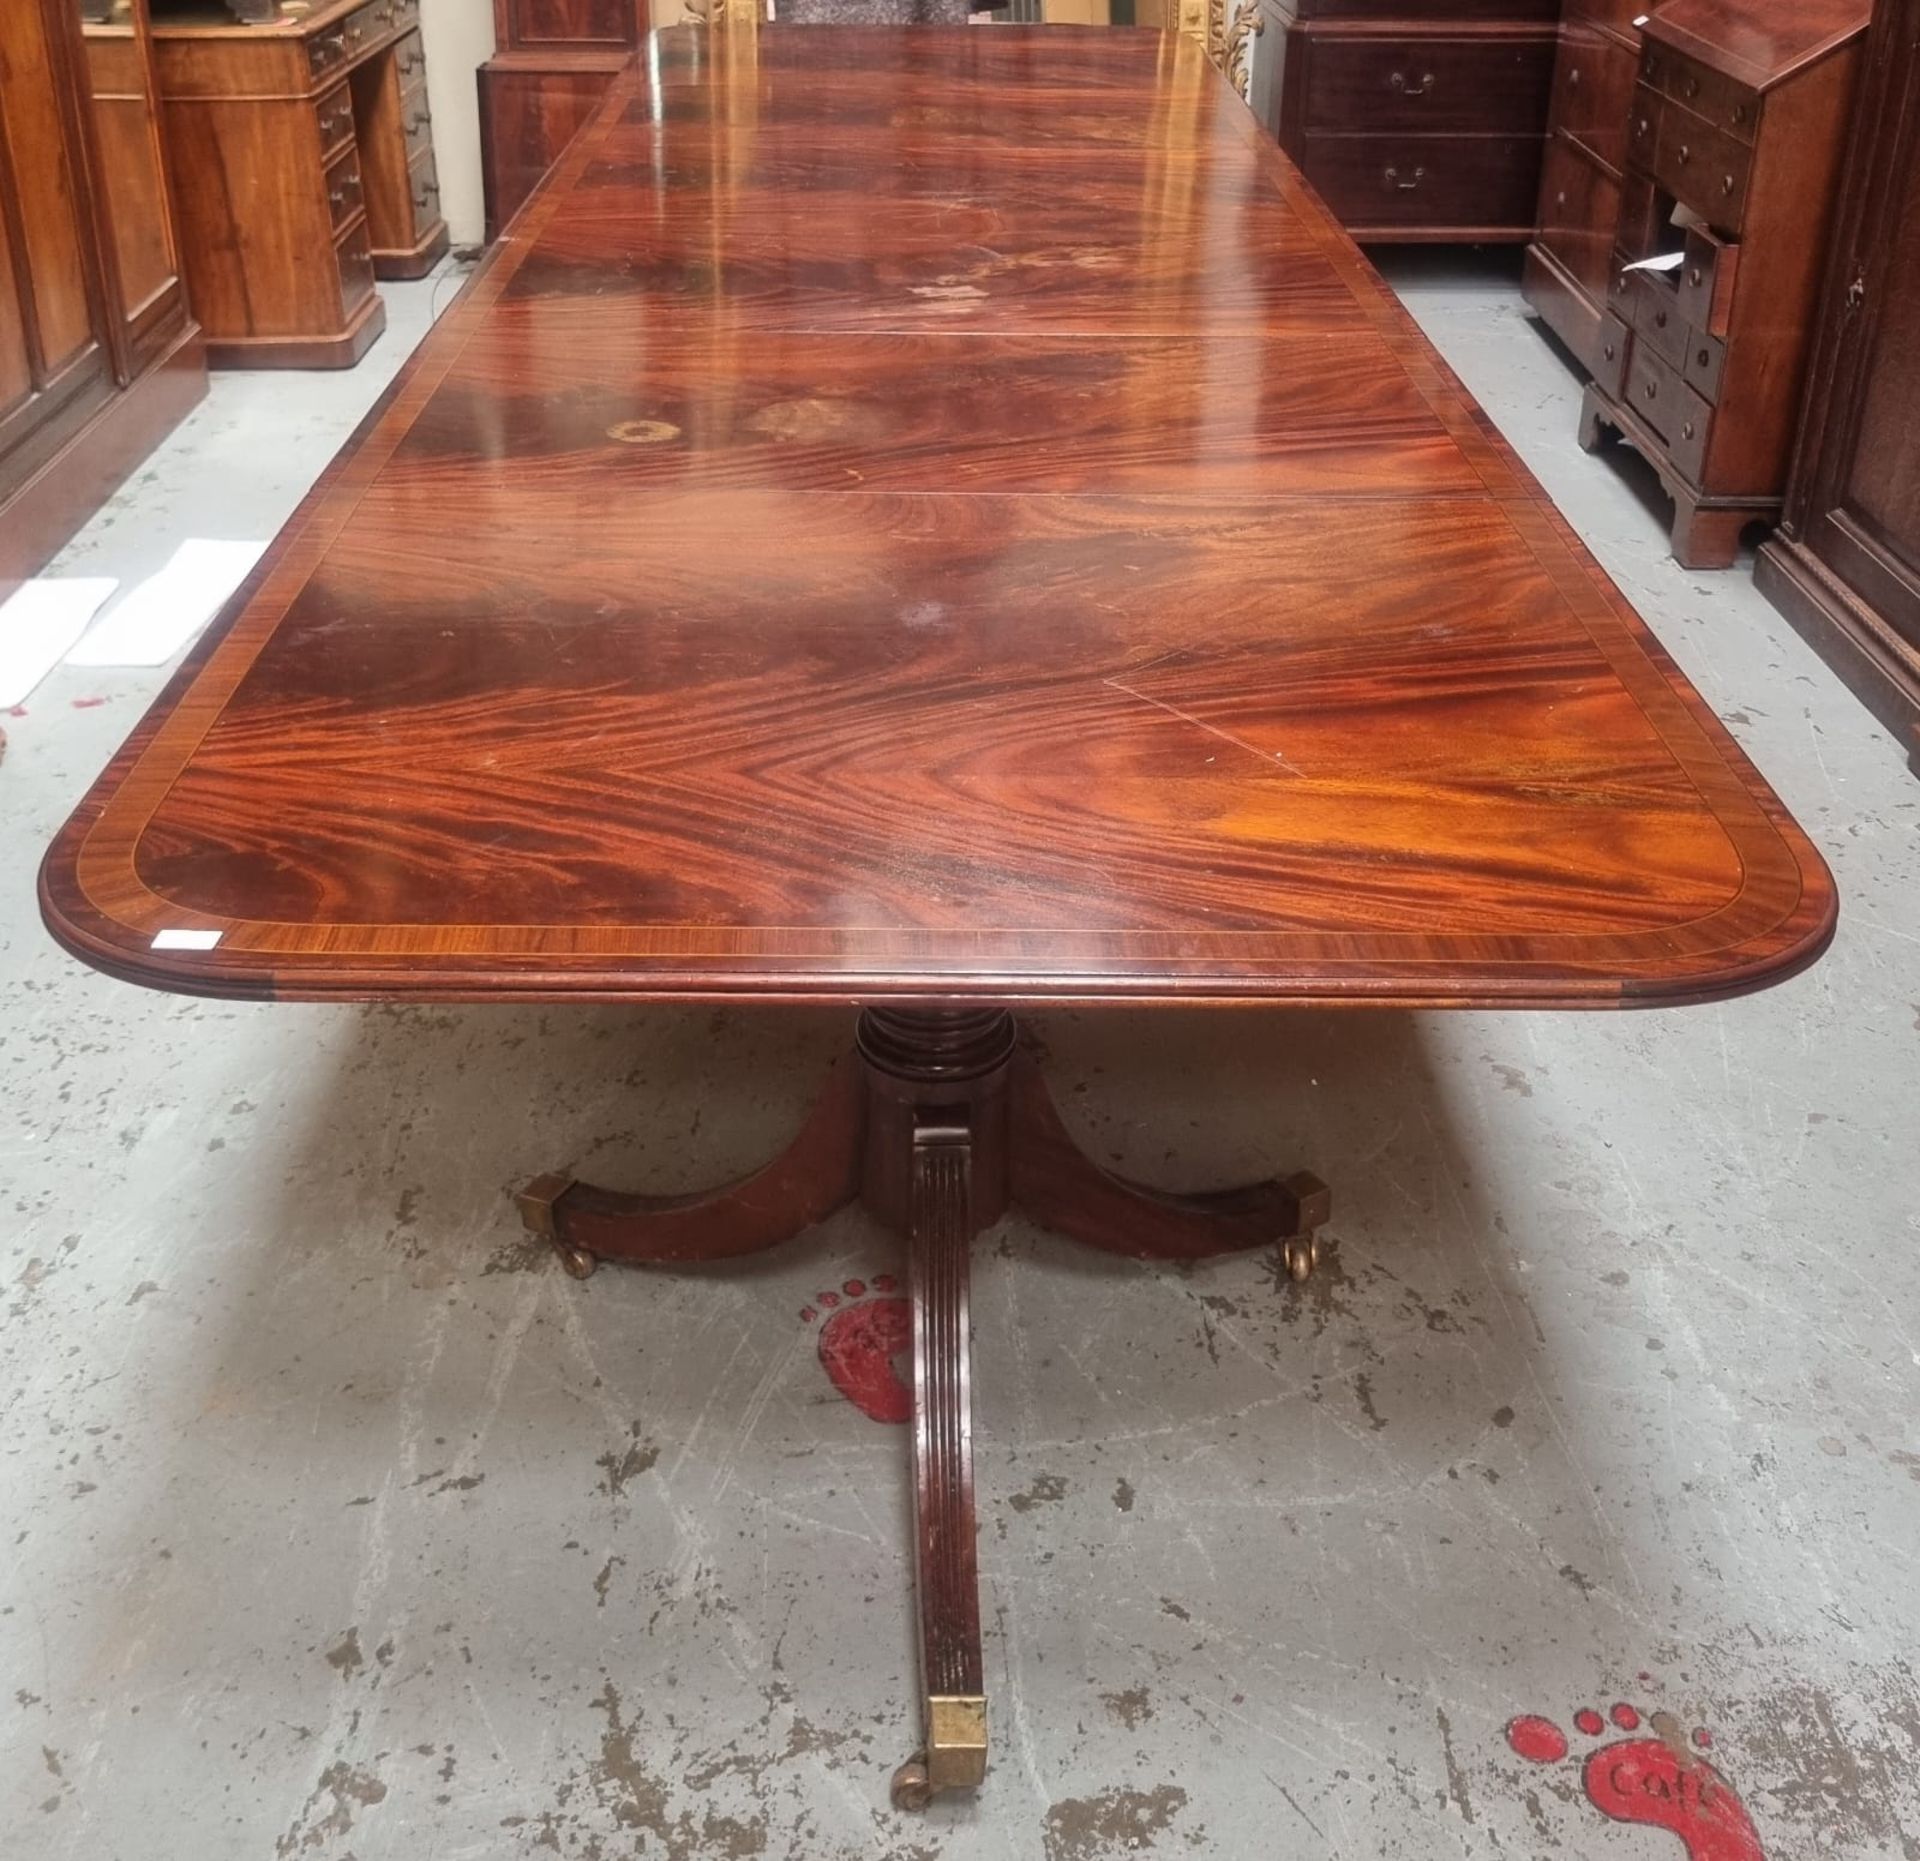 REGENCY STYLE INLAID MAHOGANY TRIPLE PESESTAL DINING TABLE - Image 9 of 10